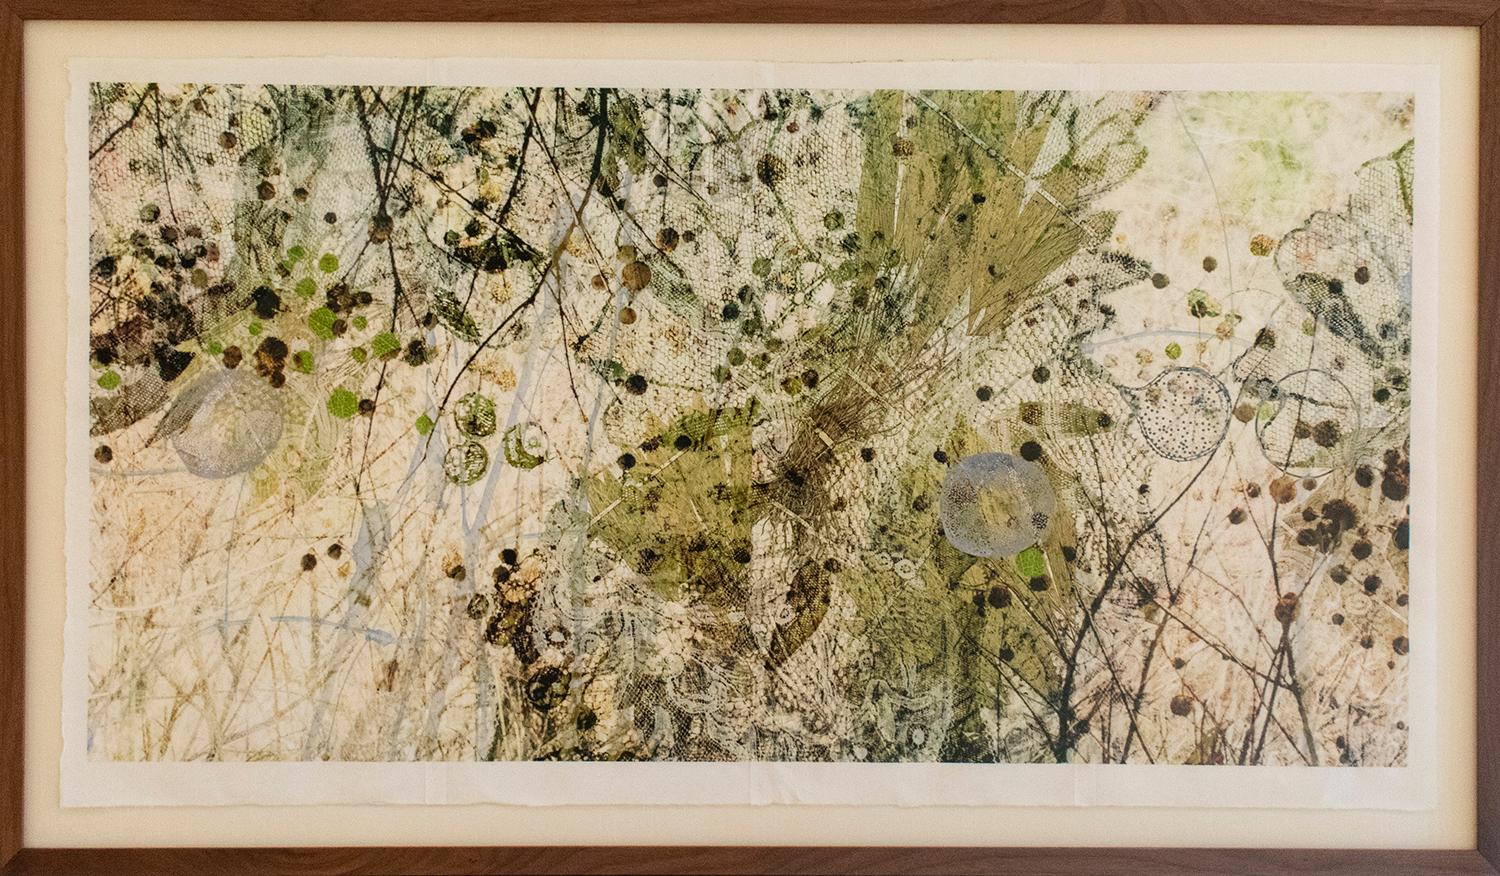 Horizontal abstracted botanical photograph in earthy shades of green, beige, brown
pigment print on mulberry paper, edition of 5
27 x 50 inches unframed, 31.5 x 55 x 1 inches in natural wood frame with non-reflective glass and wiring 

Lori Van